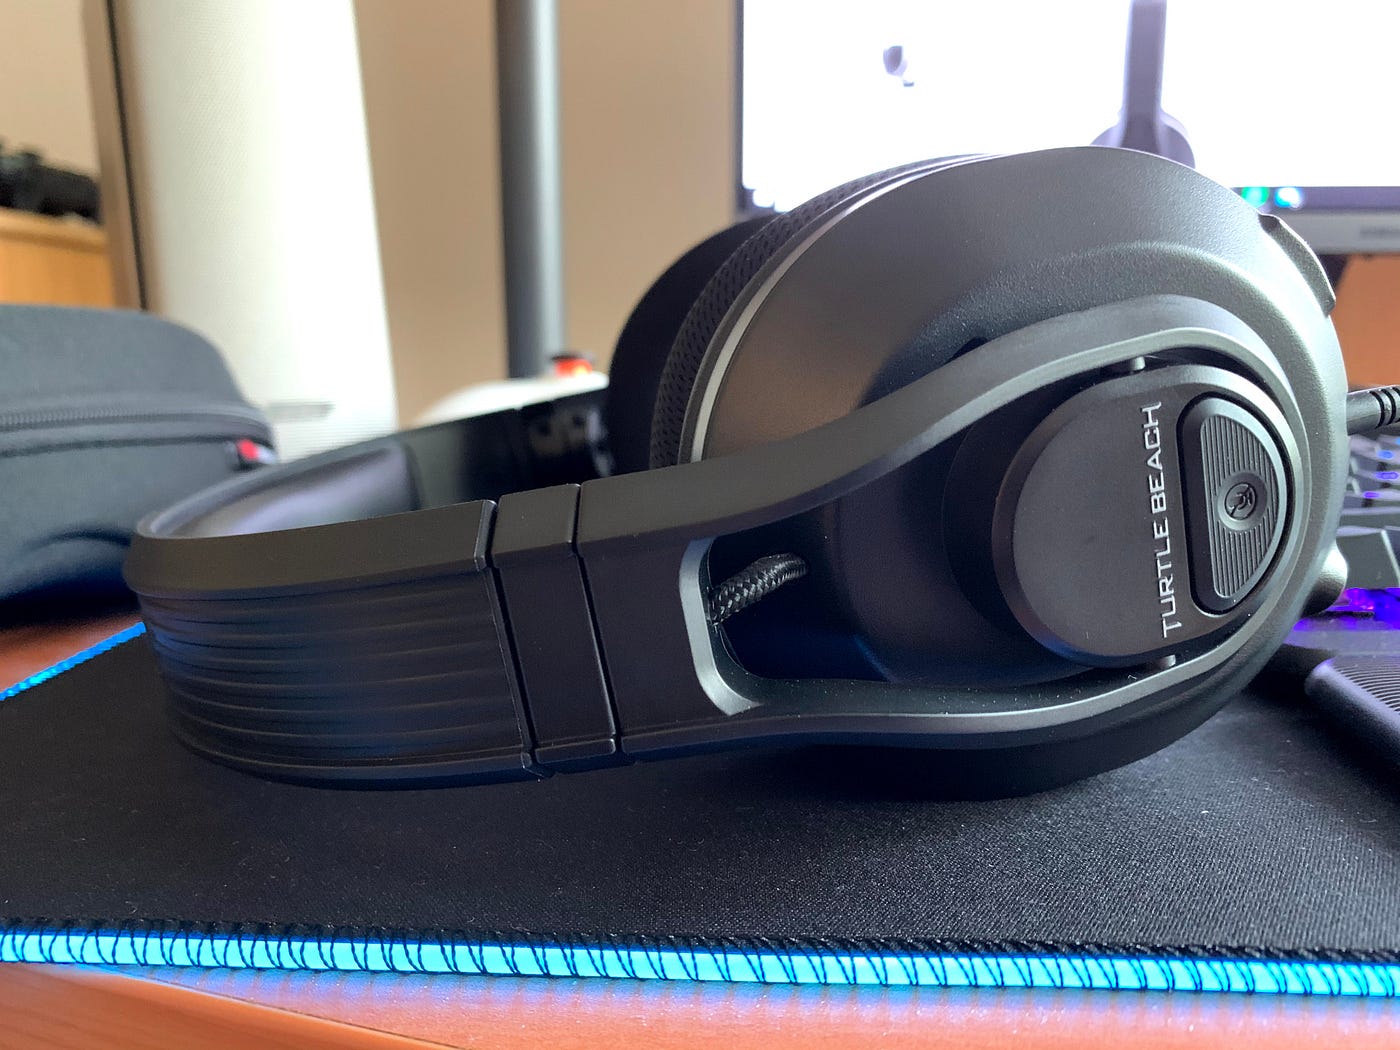 Turtle Beach Audio Woes: Troubleshooting Self-hearing Issues